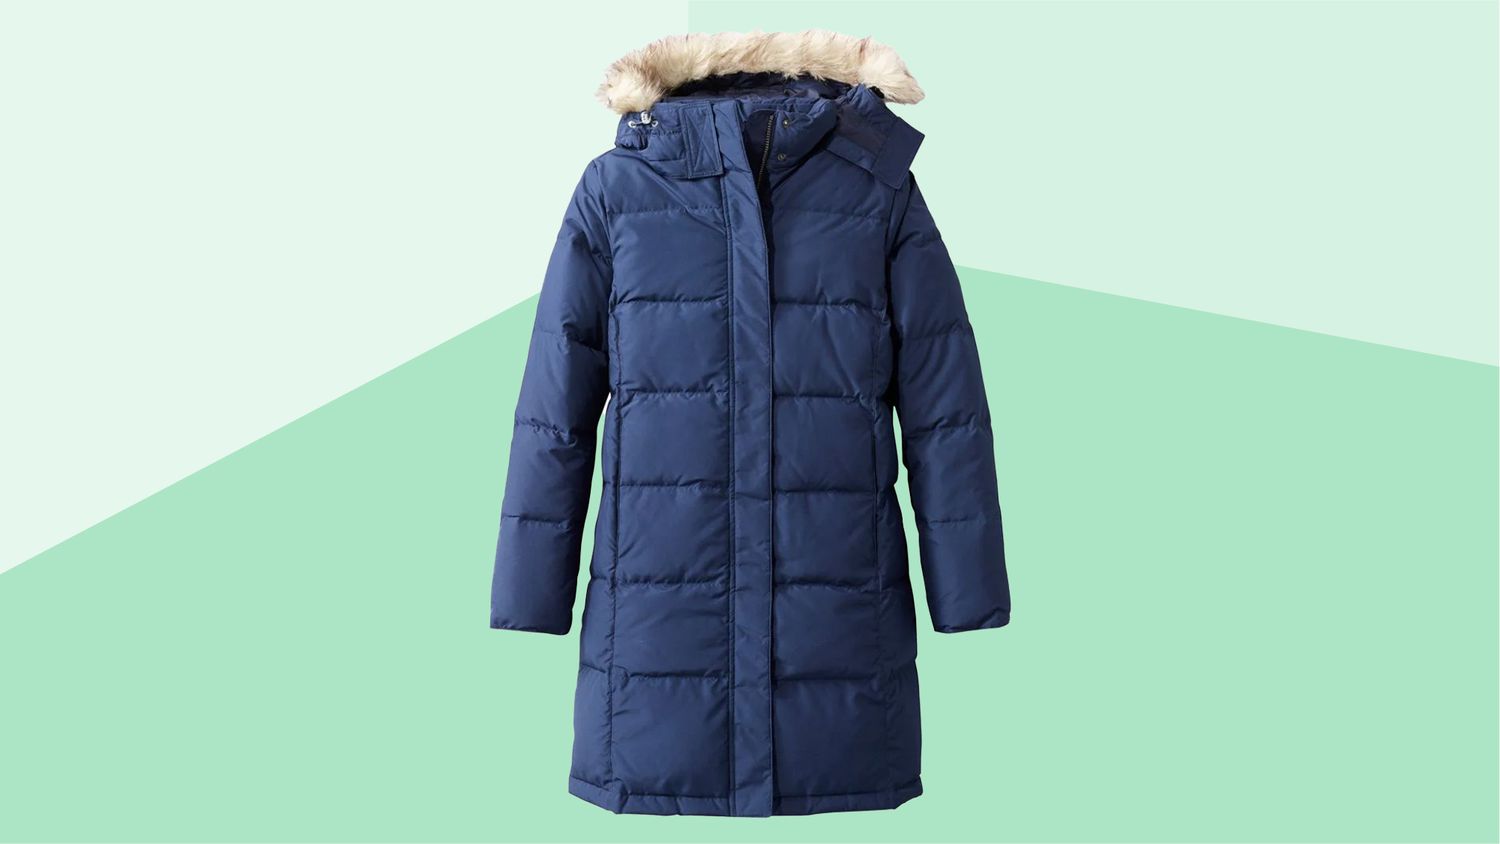 Girls Winter Down Coats Thickened Warm Mid-Long Puffer Parka Jacket with Fur Hood